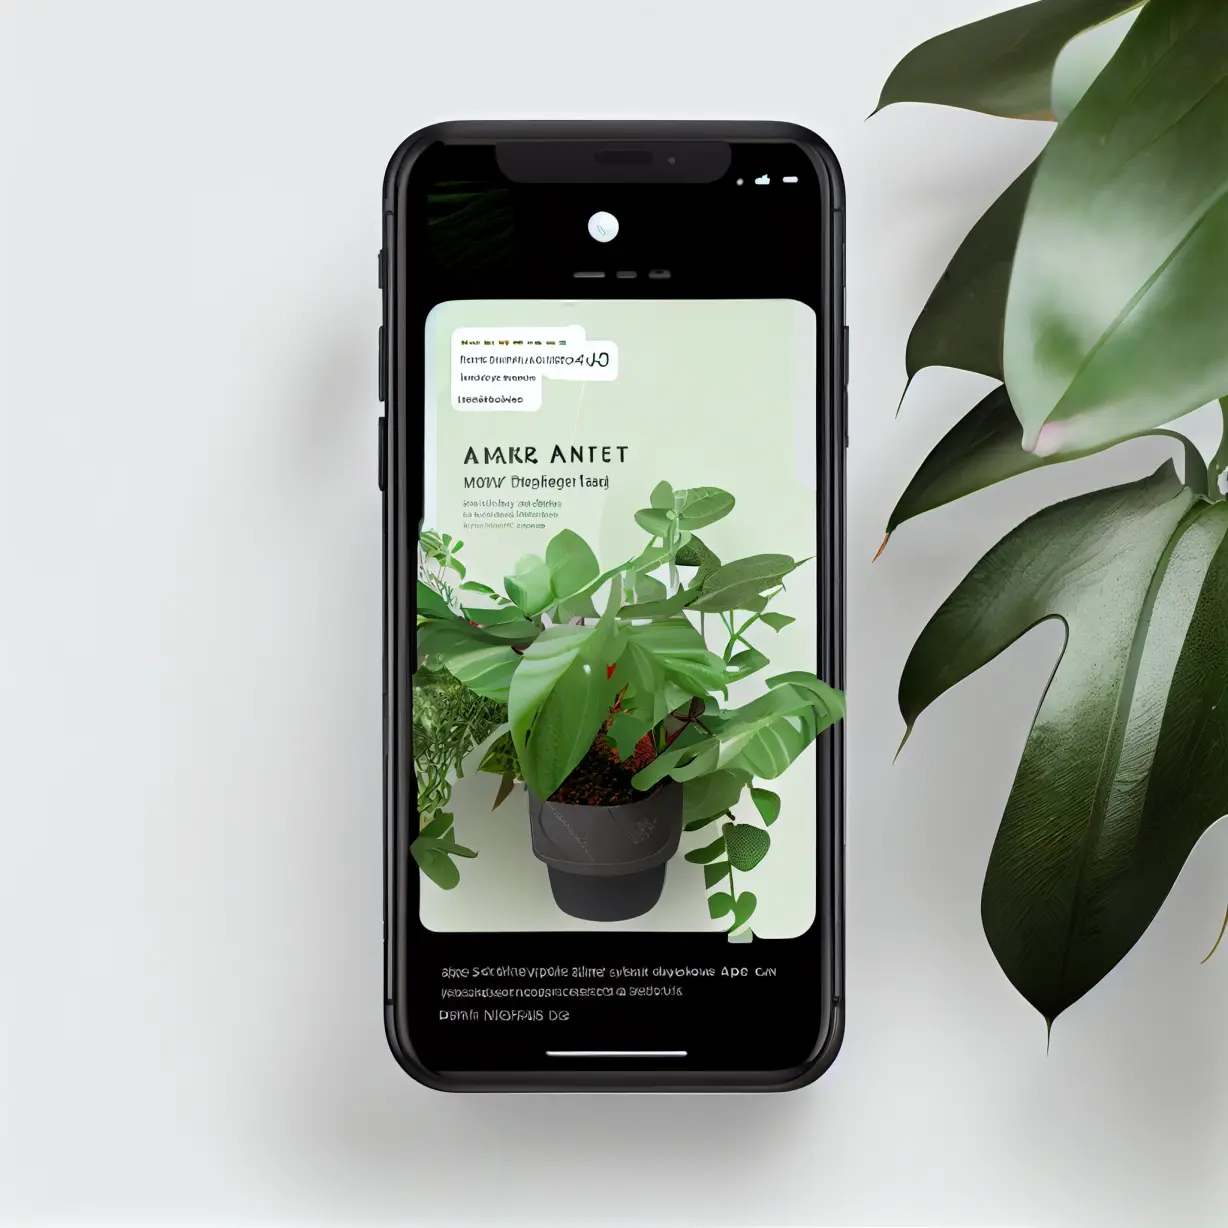 photography of an iphone [with a modern user interface plant identification app on the screen] inspired by Behance and Figma and dribbble